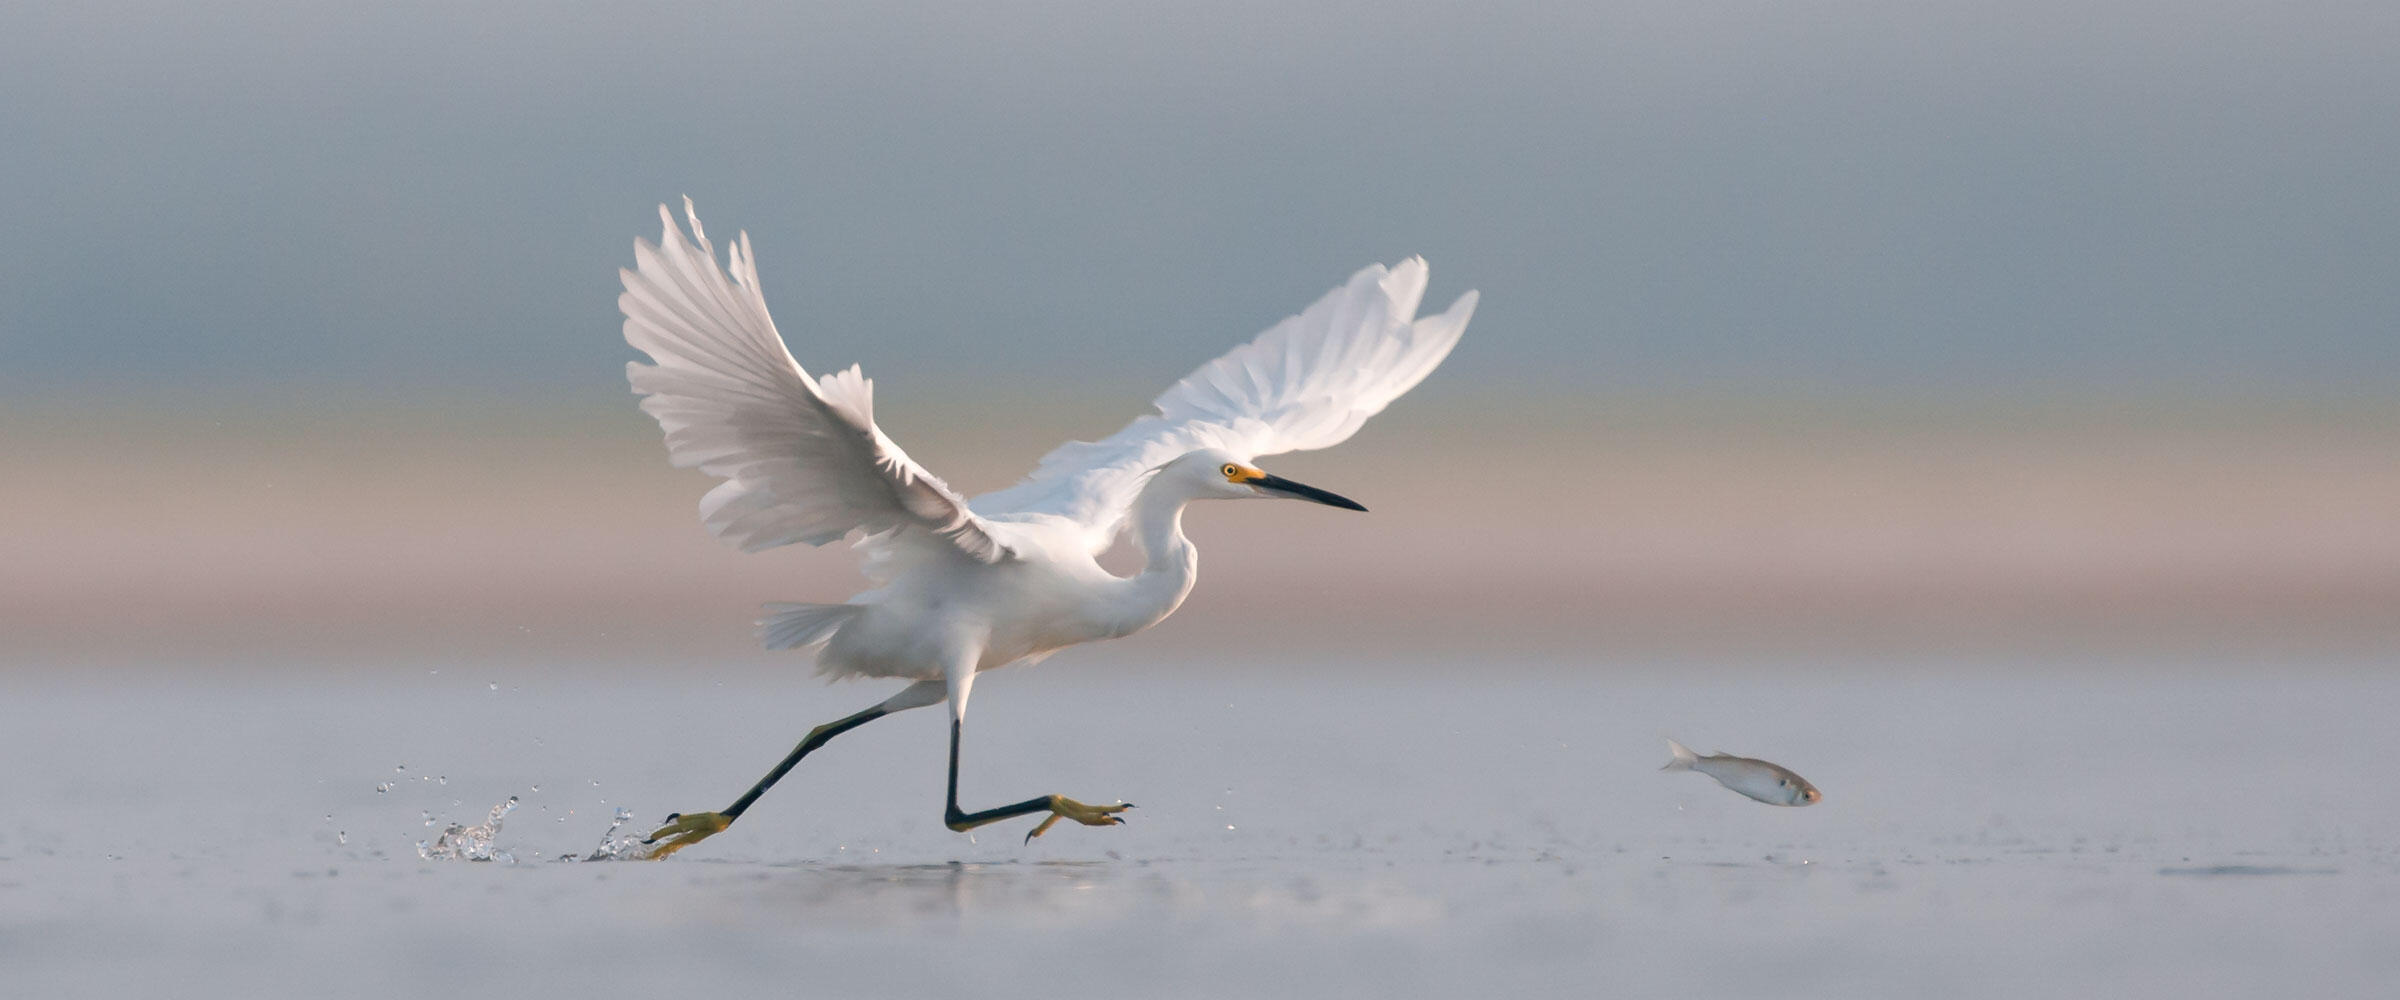 Snowy Egret chases fish in water.